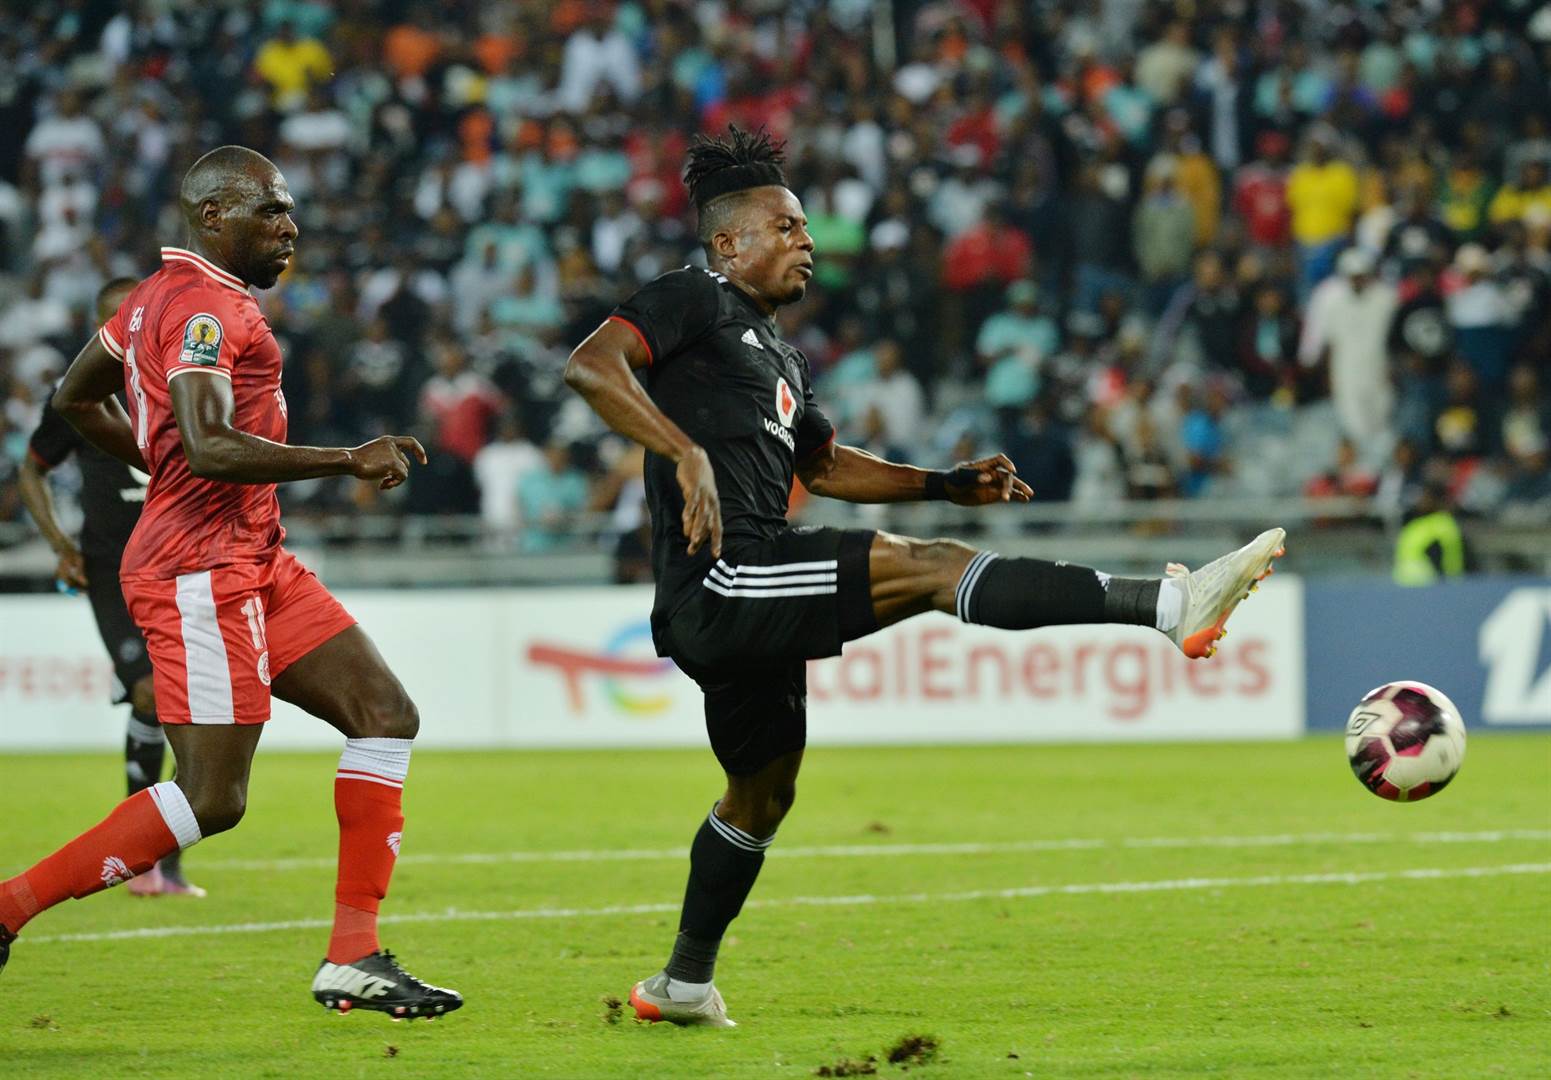 Orlando Pirates players ratings after JS Saoura win: Lorch and Ndah dazzle  in Caf Confederation Cup